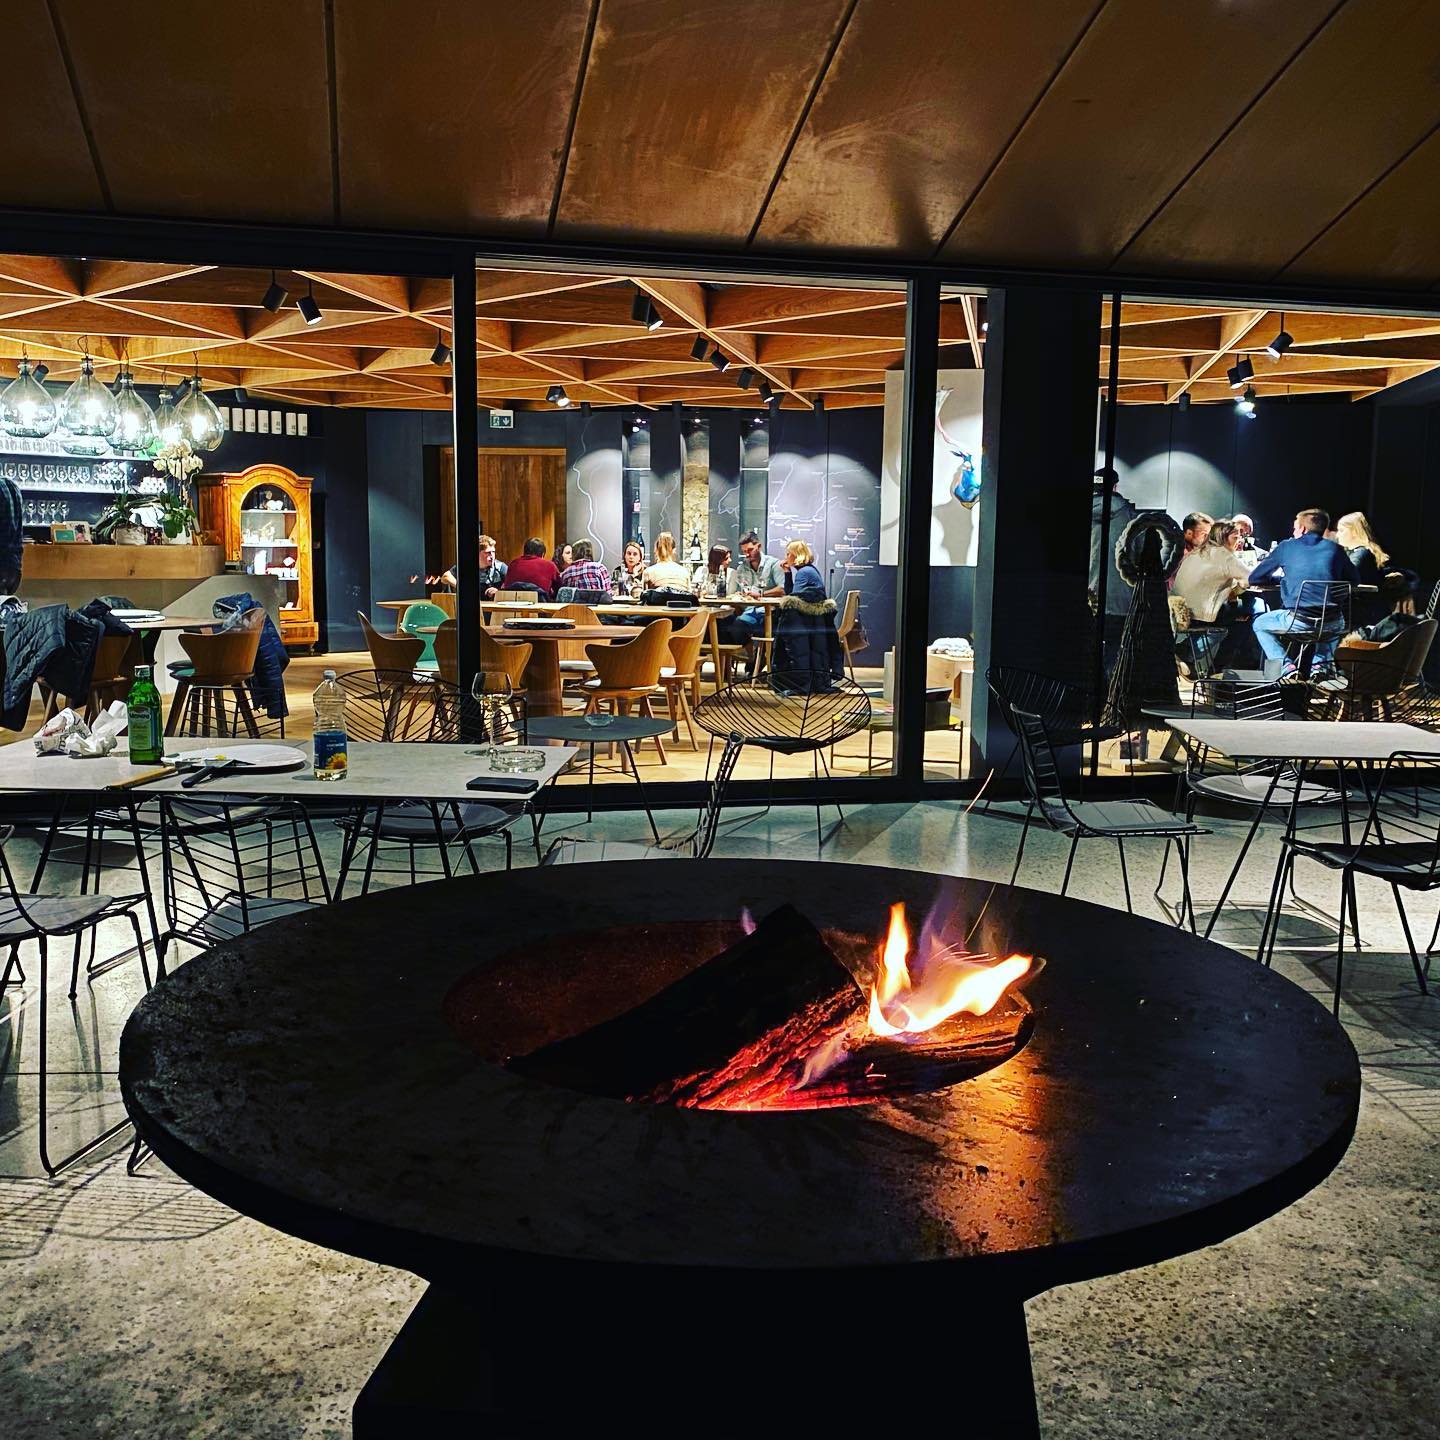 An open fire grill outside the wine tasting room at Edi Simcic wine producer from Goriska Brda wine region in Slovenia with two groups enjoying locally produced organic wine